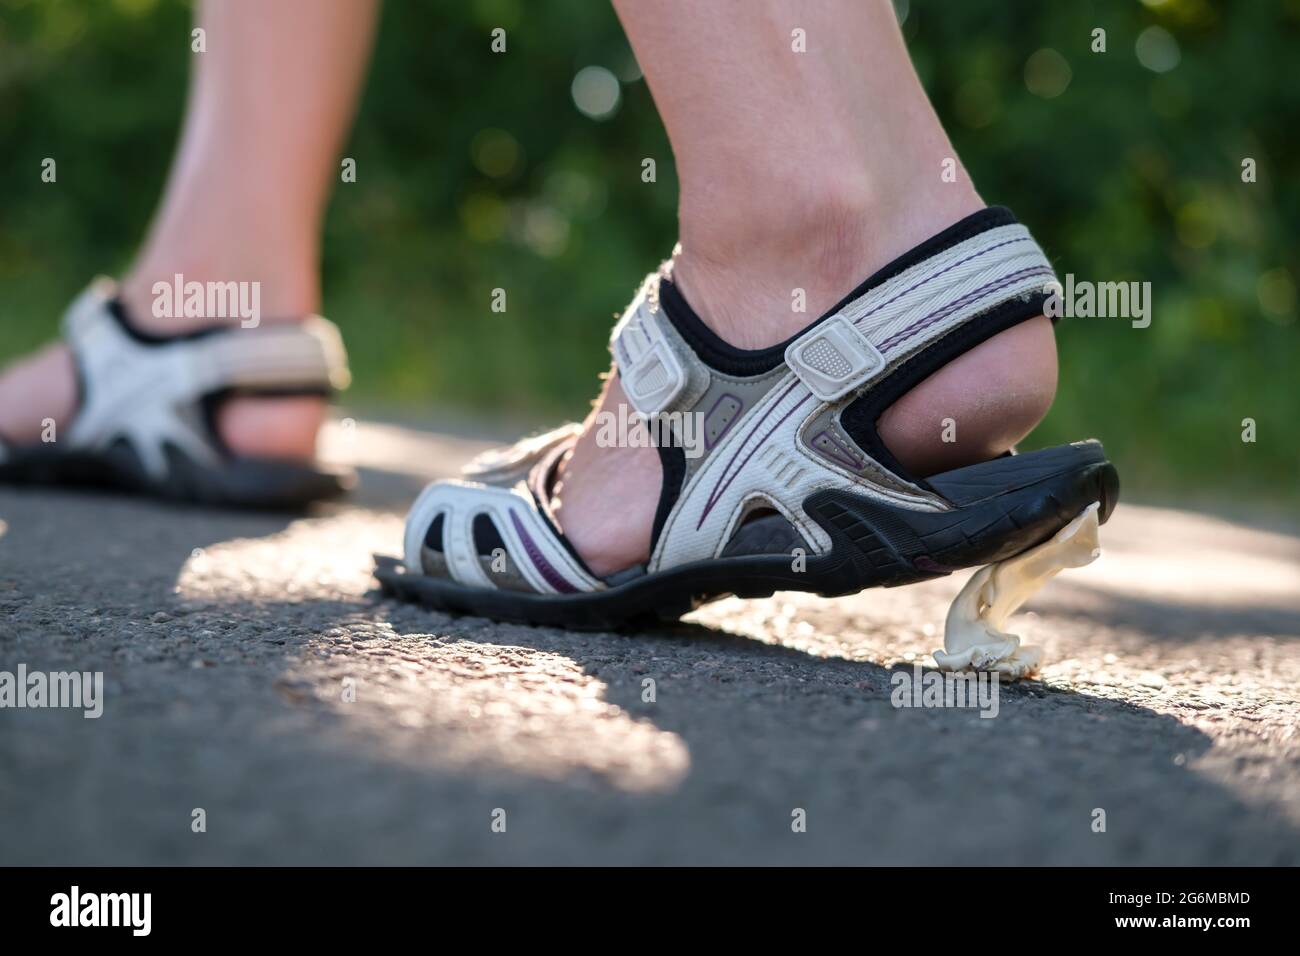 Woman foot in sandals stepped on a chewing gum, on the sidewalk. Close-up. Stock Photo